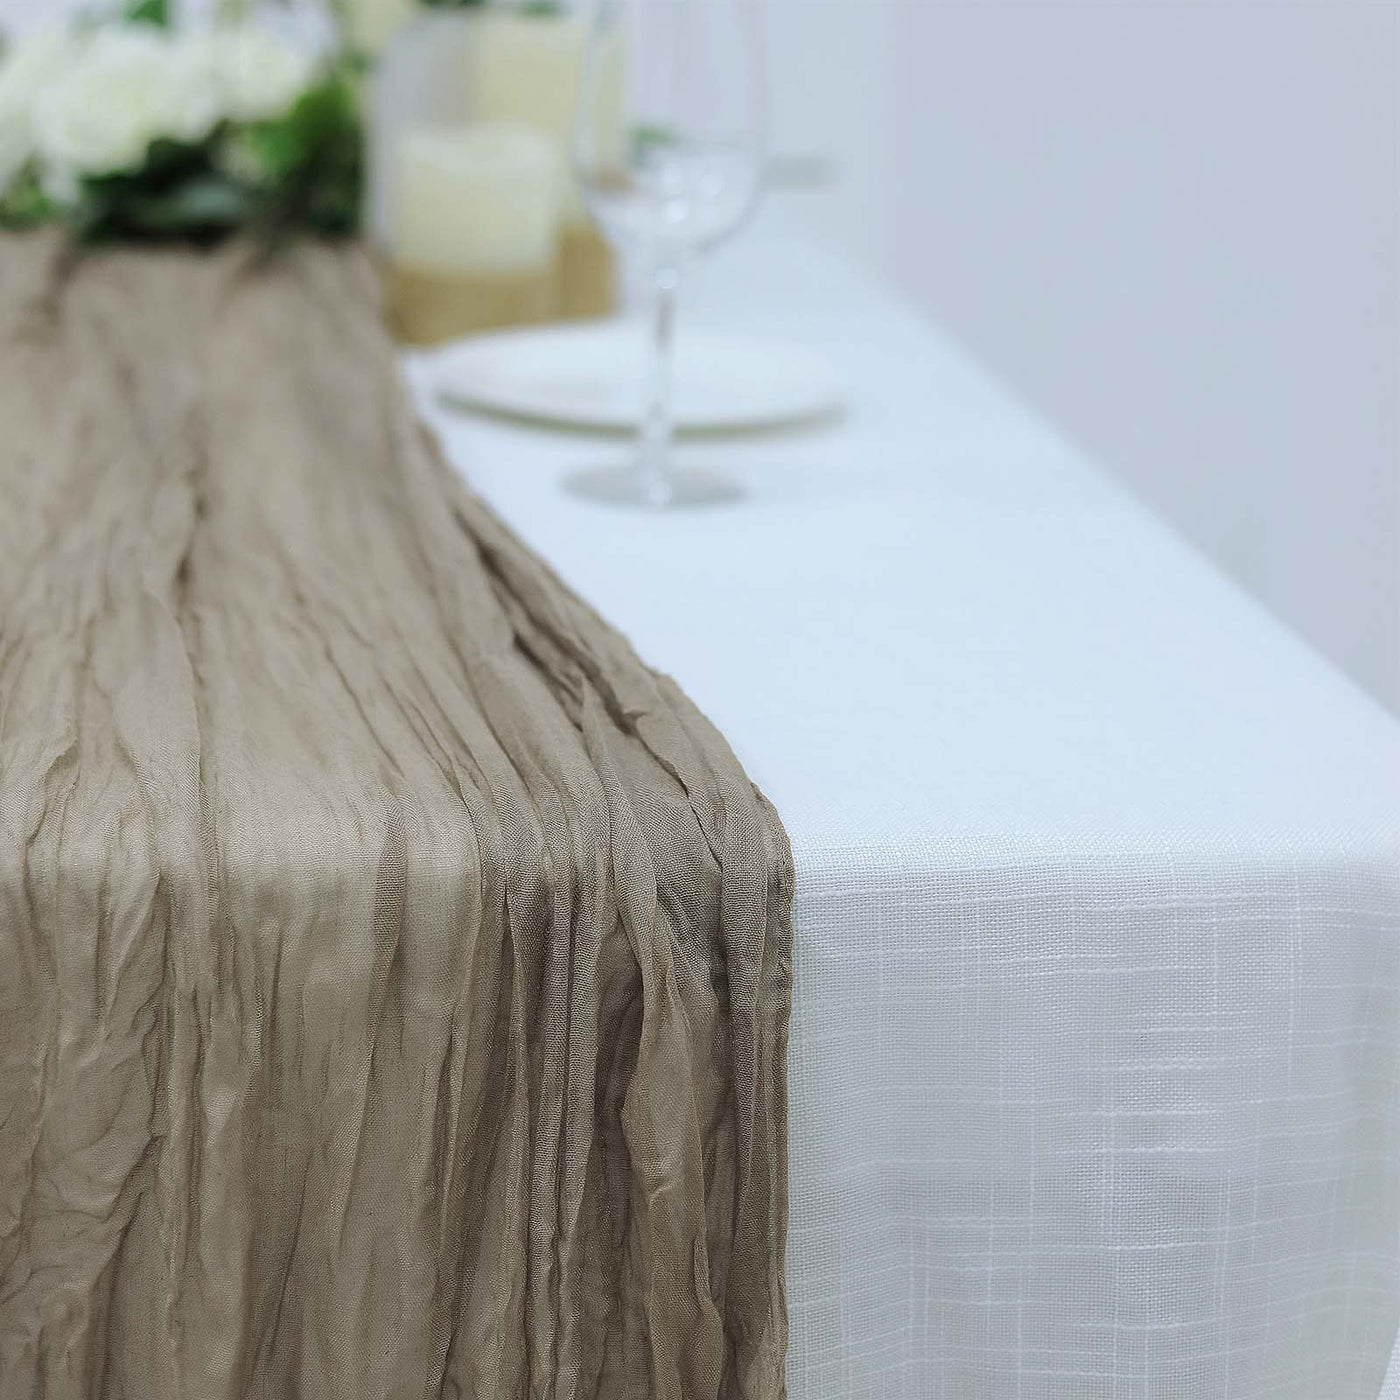 10ft Natural Gauze Cheesecloth Table Runner | eFavormart.com